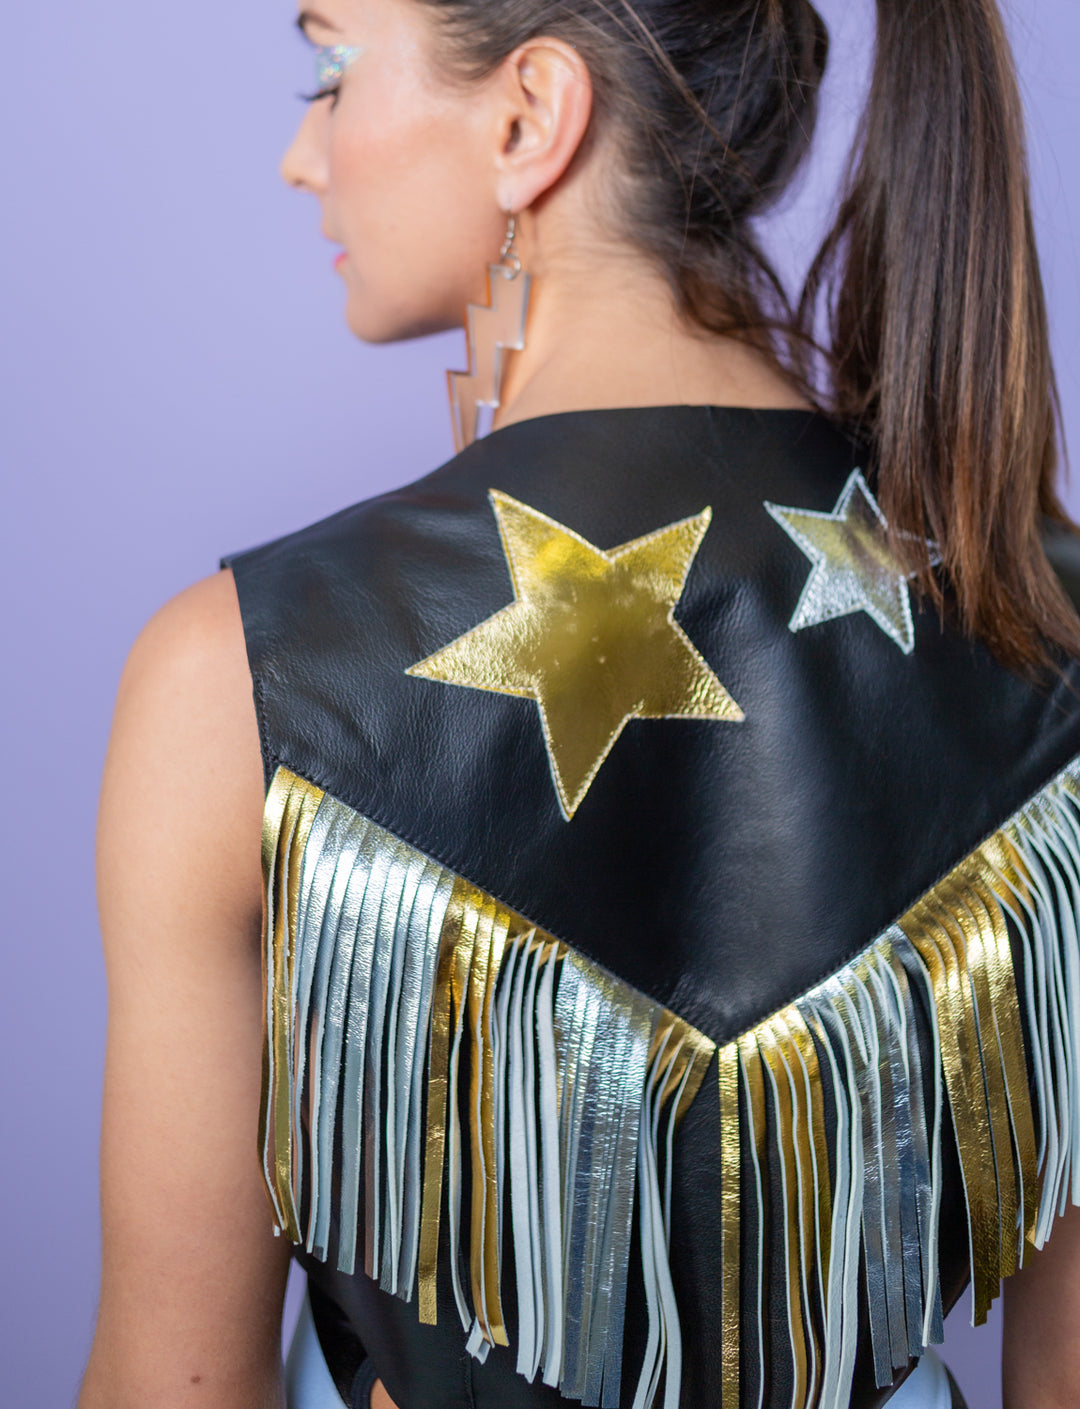 The image shows the back of a woman wearing a black leather waistcoat jacket with gold and silver fringe and applique stars.